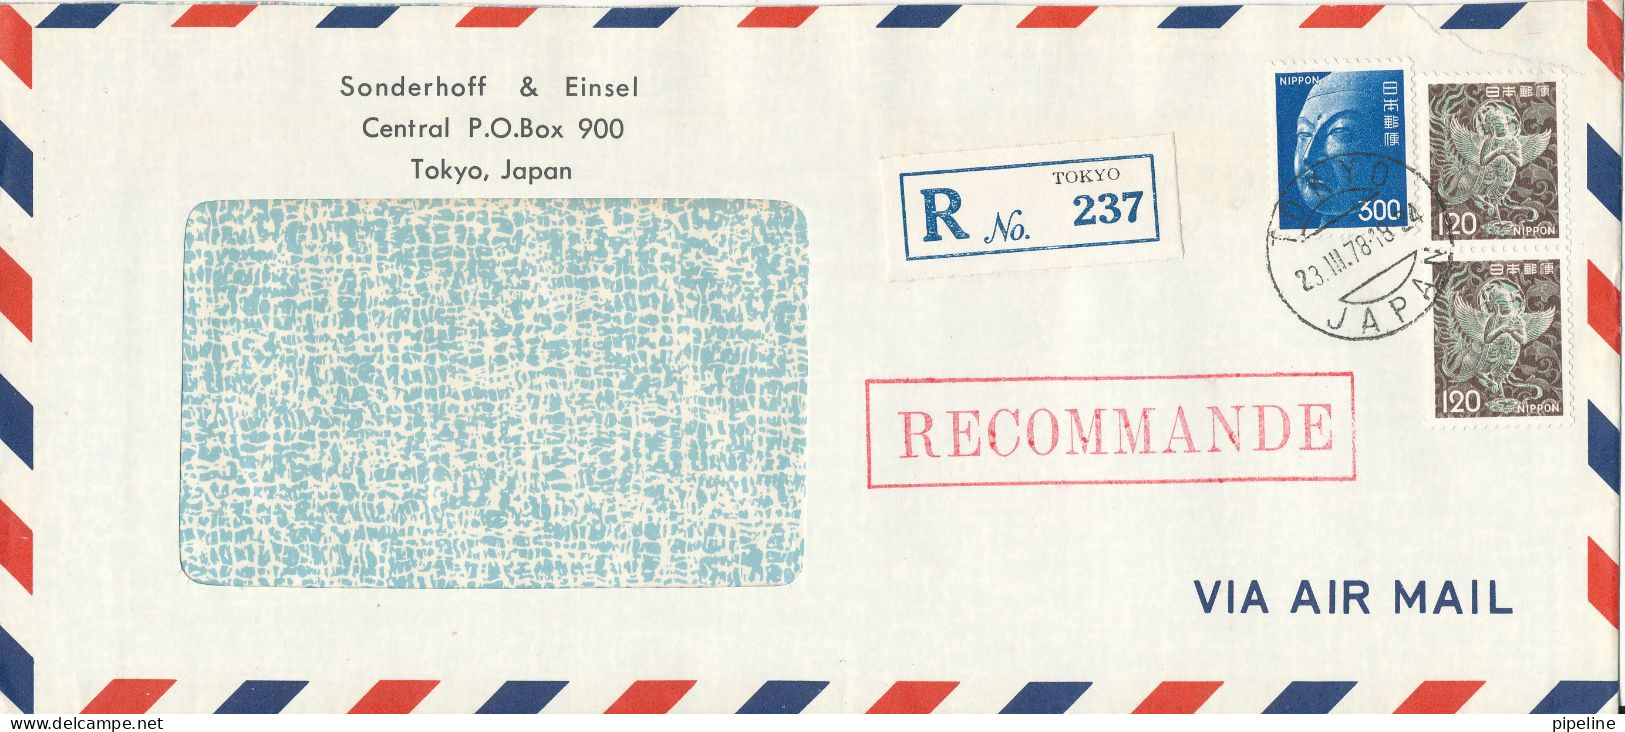 Japan Registered Air Mail Cover Sent To Germany Tokyo 23-3-1978 - Poste Aérienne